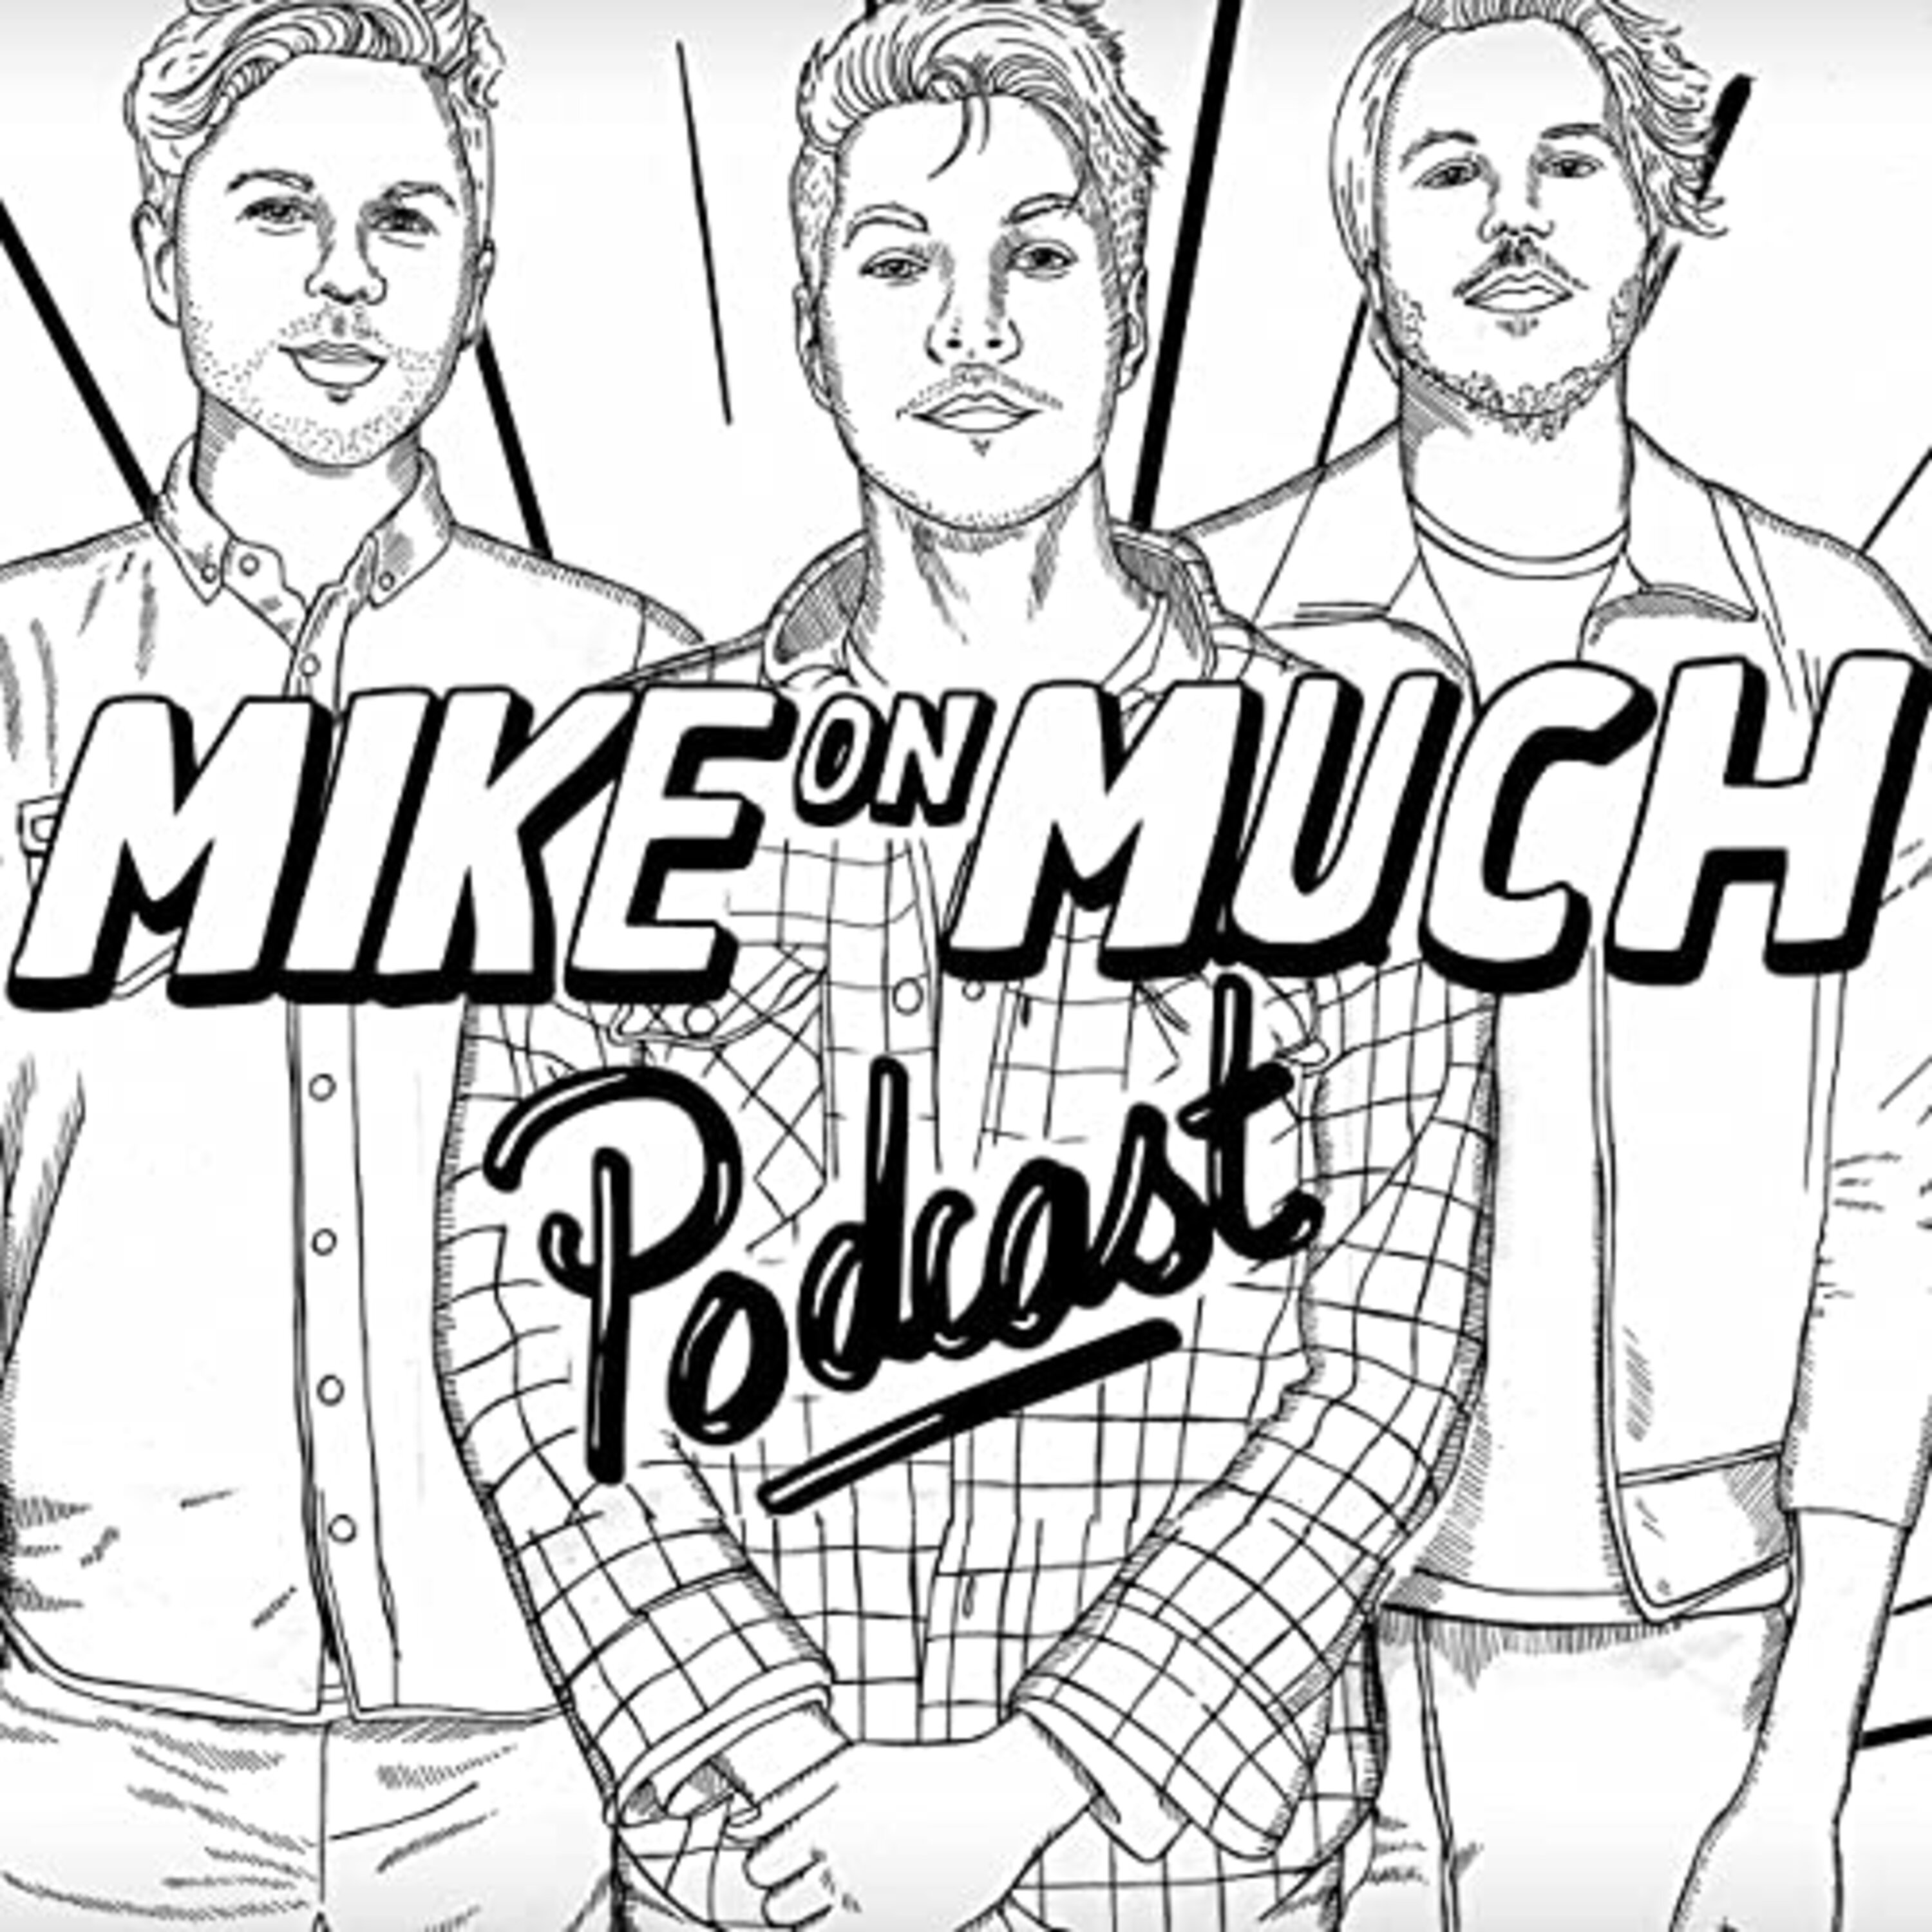 Season 1 Mike On Much: 